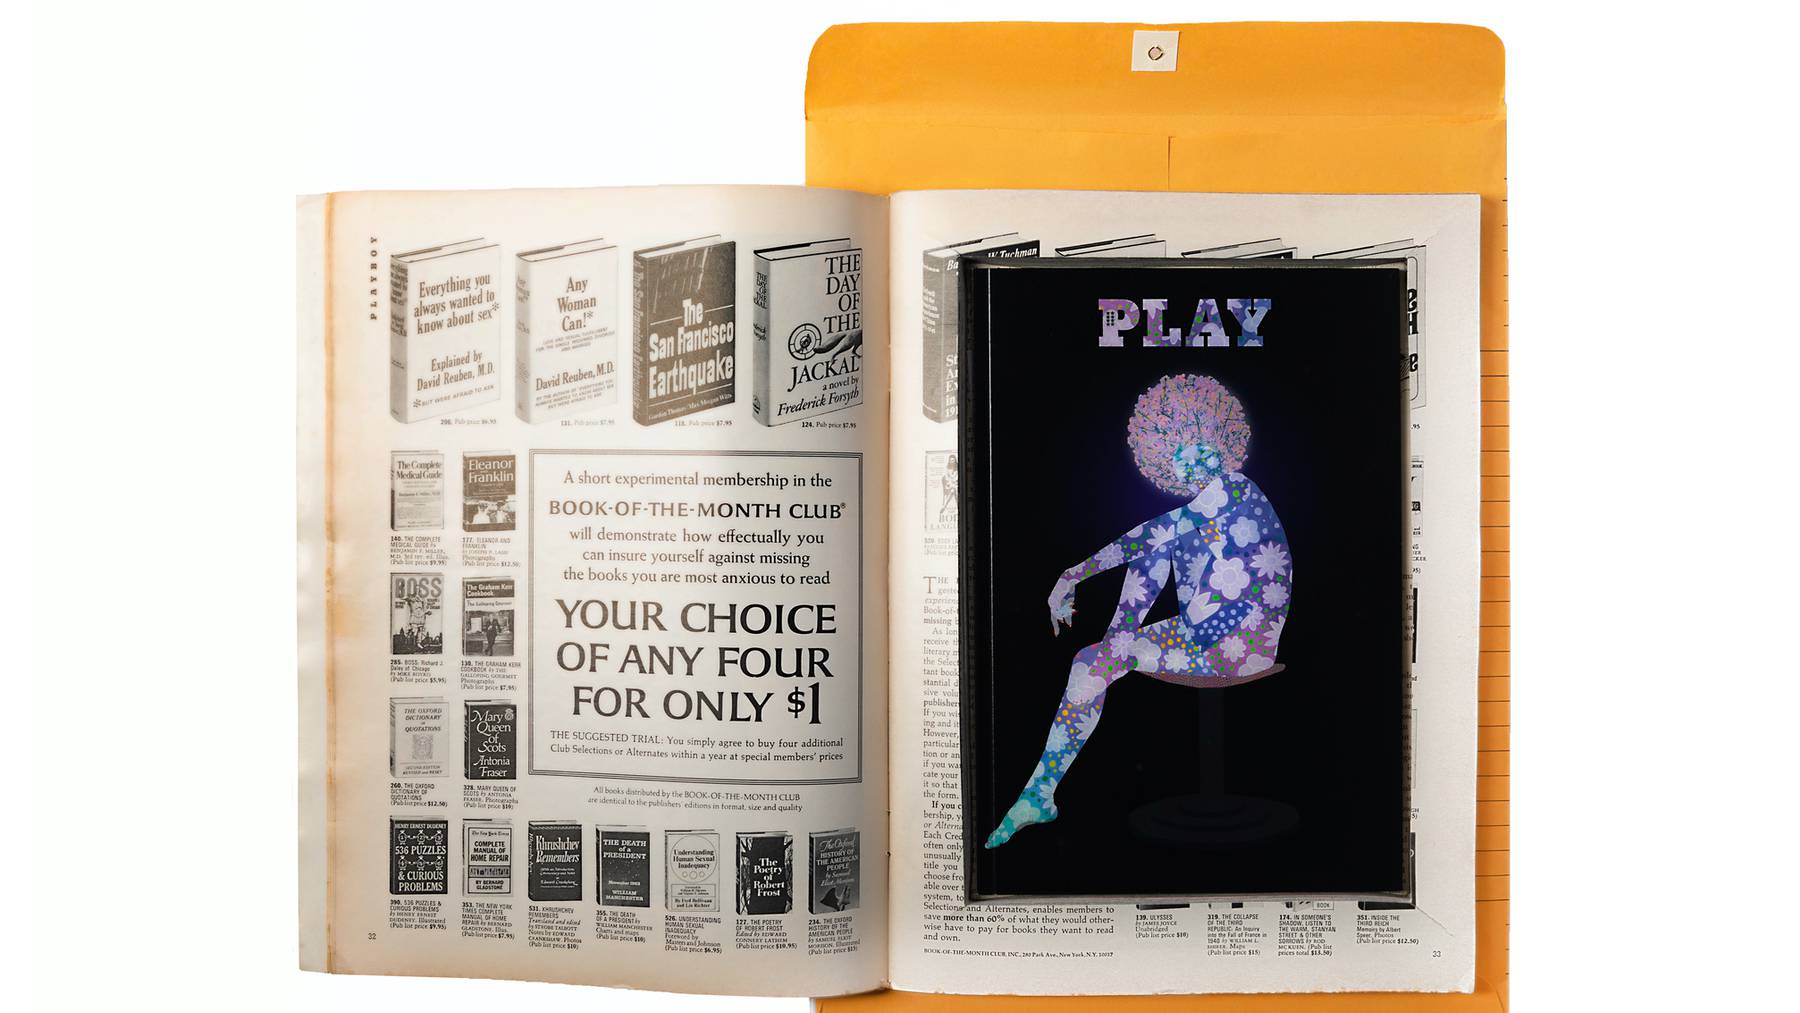 One part of the first edition of "_____is fun" involves a vintage Playboy magazine.